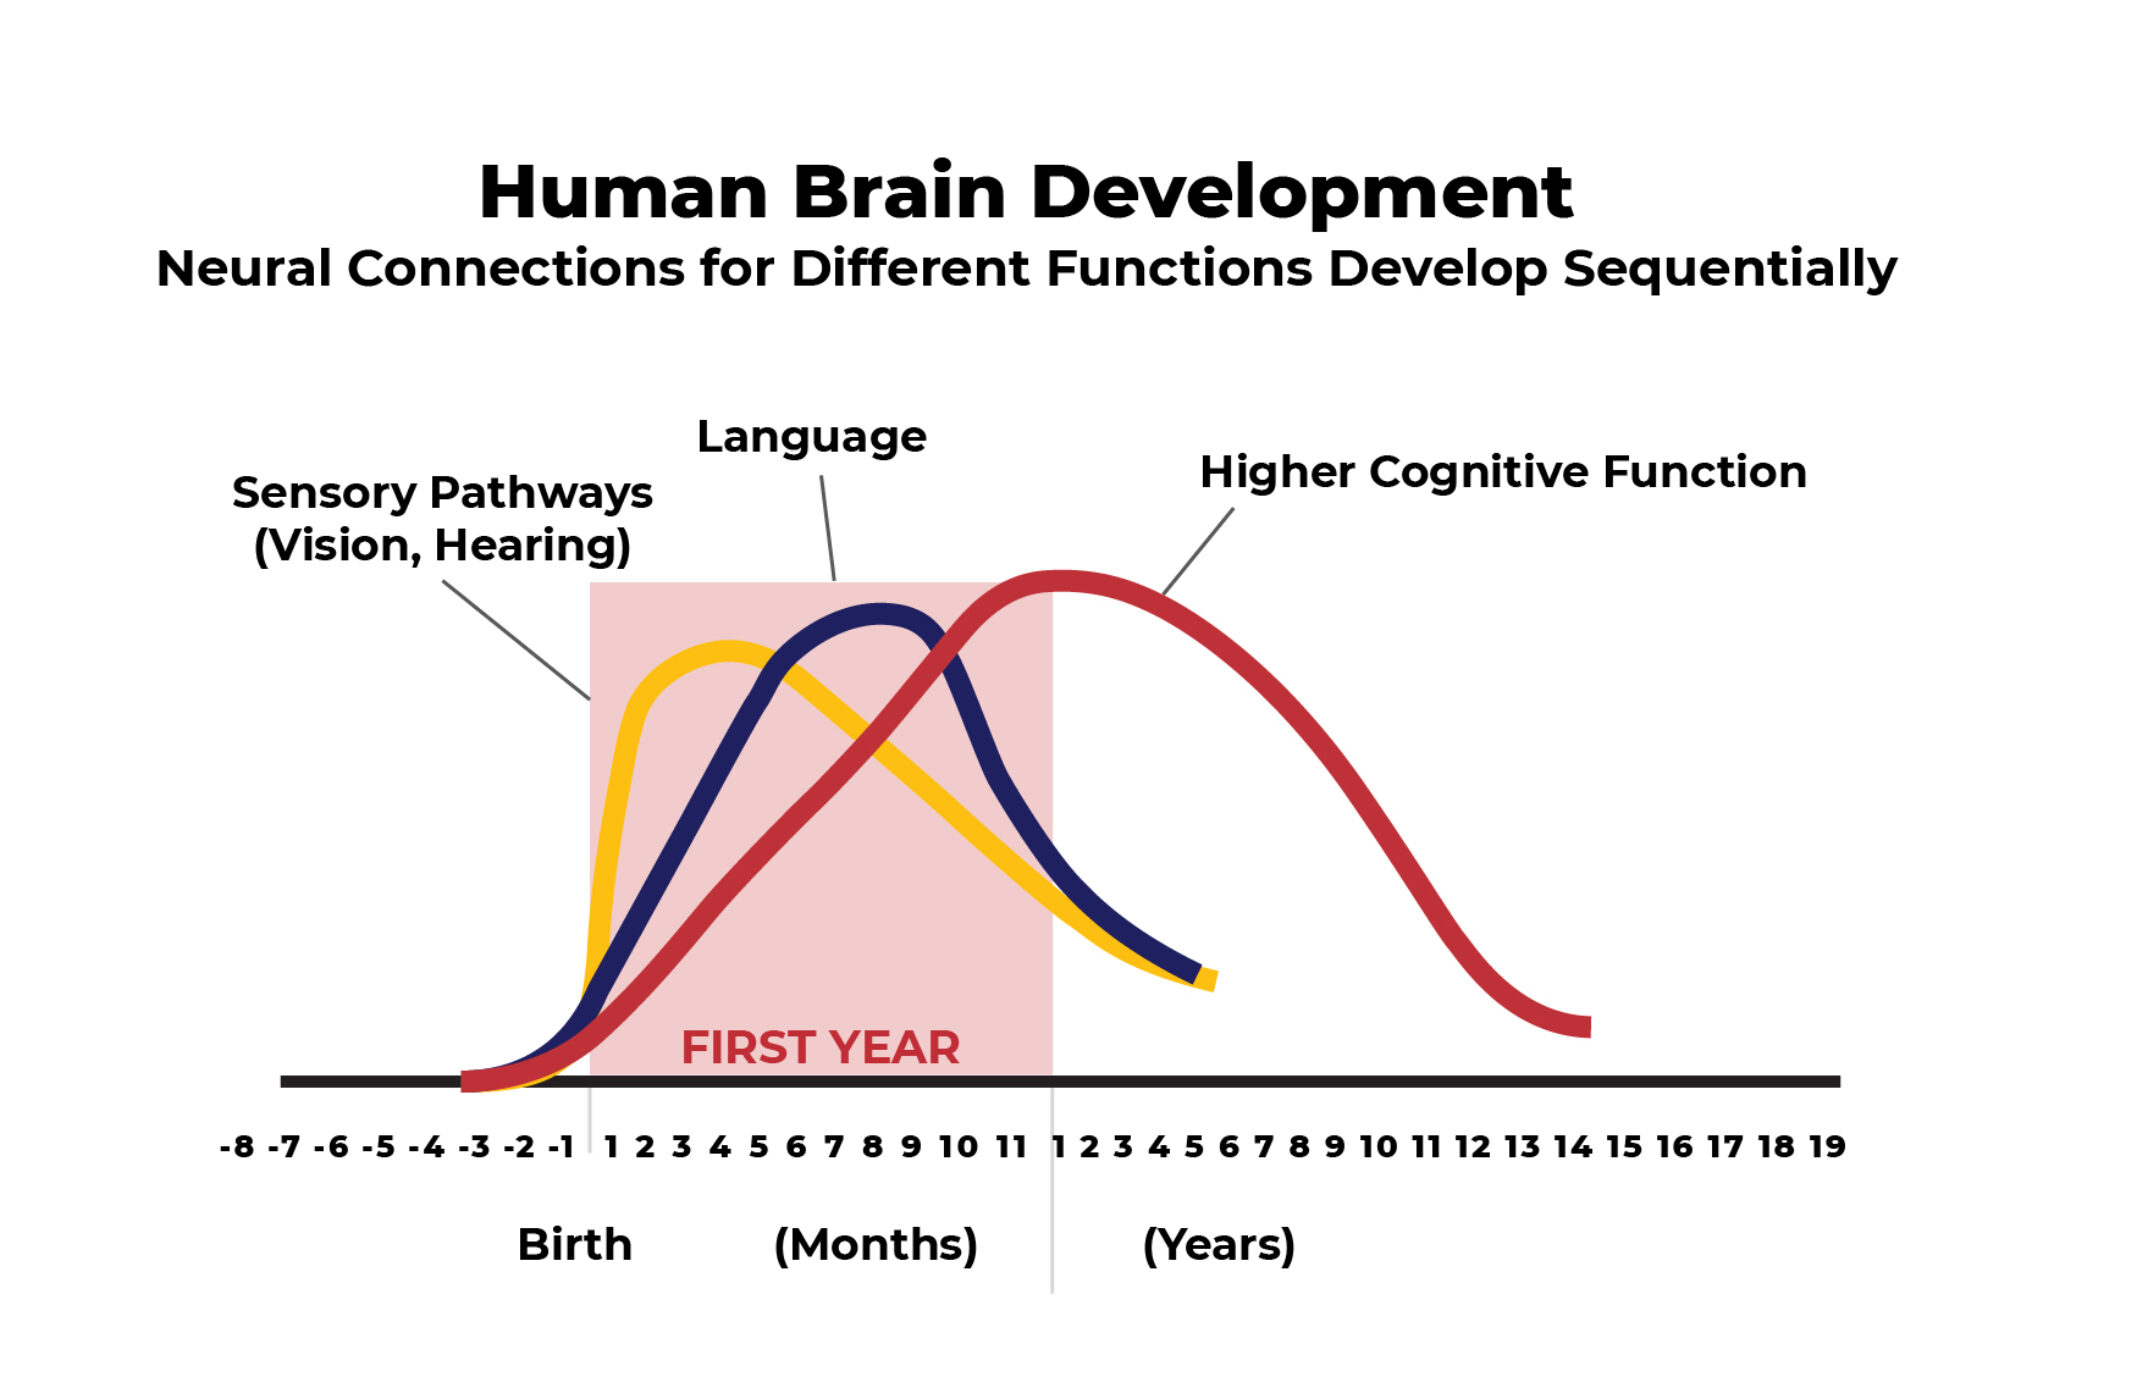 In the proliferation and pruning process, simpler neural connections form first, followed by more complex circuits. The timing is genetic, but early experiences determine whether the circuits are strong or weak. Data Source: C.A. Nelson (2000). Credit: Center on the Developing Child.